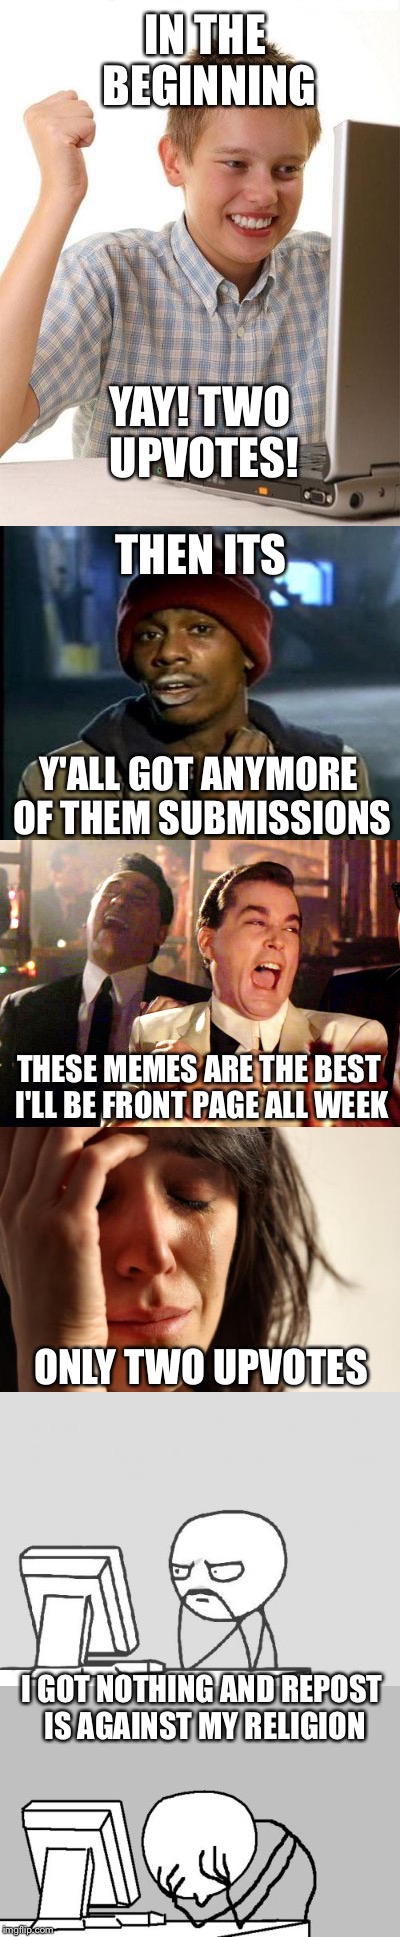 A Brief History of Becoming a Meme Addict. | IN THE BEGINNING; YAY! TWO UPVOTES! THEN ITS; Y'ALL GOT ANYMORE OF THEM SUBMISSIONS; THESE MEMES ARE THE BEST I'LL BE FRONT PAGE ALL WEEK; ONLY TWO UPVOTES; I GOT NOTHING AND REPOST IS AGAINST MY RELIGION | image tagged in memes,imgflip,welcome to imgflip,memers block,funny | made w/ Imgflip meme maker